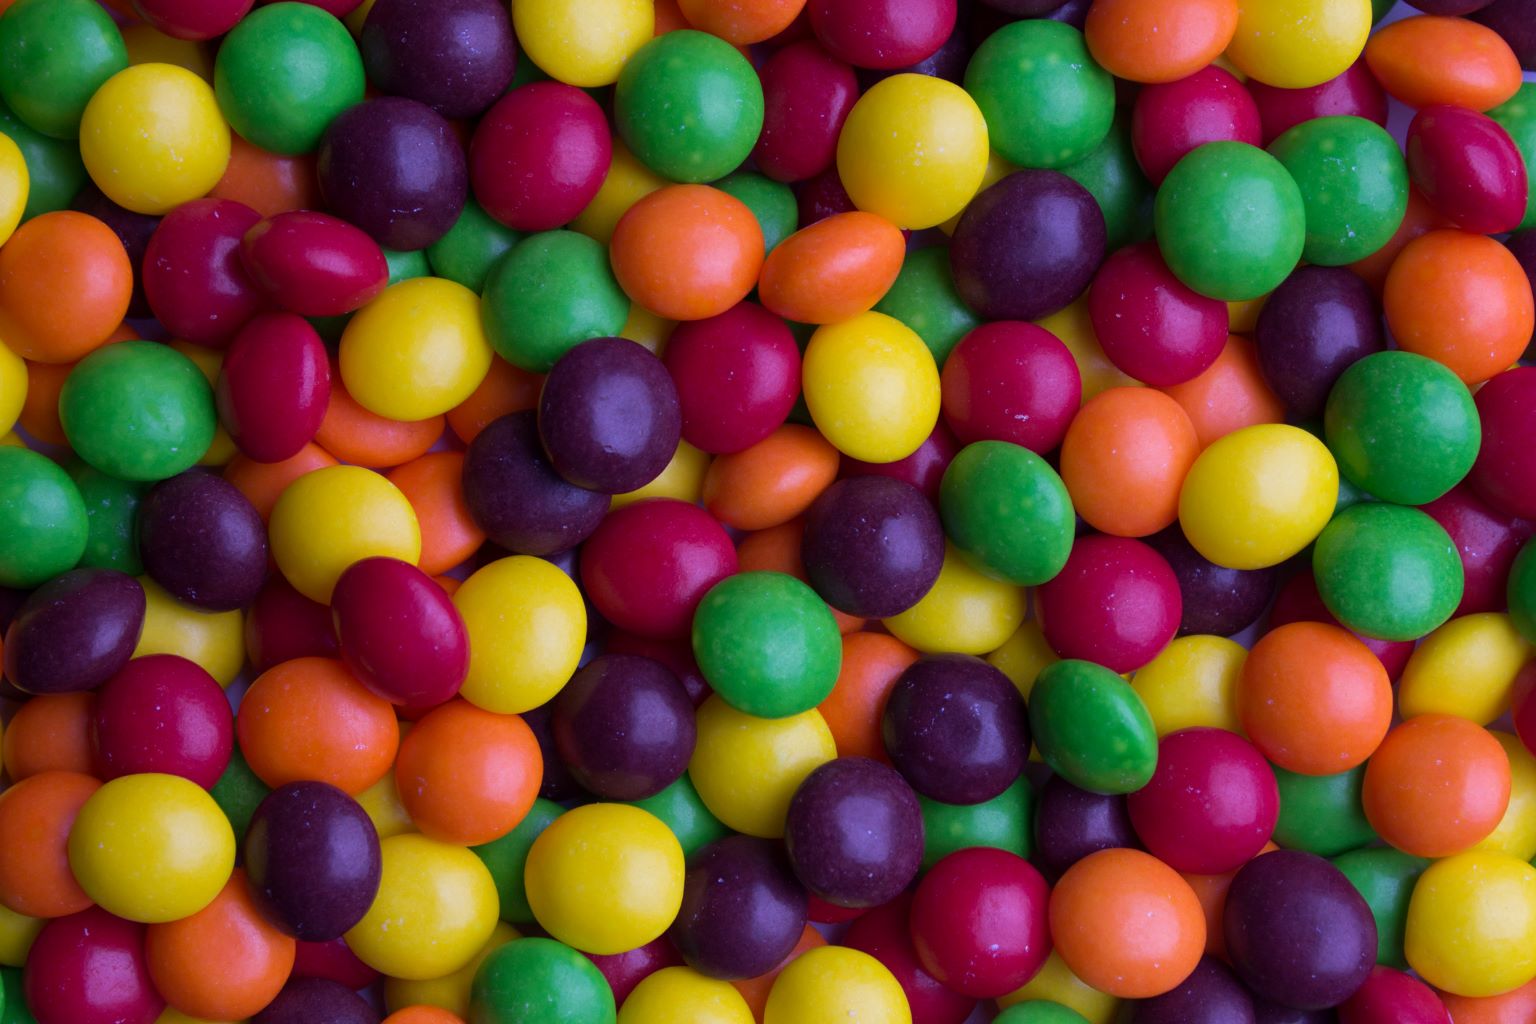 Are Skittles Toxic? A New Lawsuit Says Yes